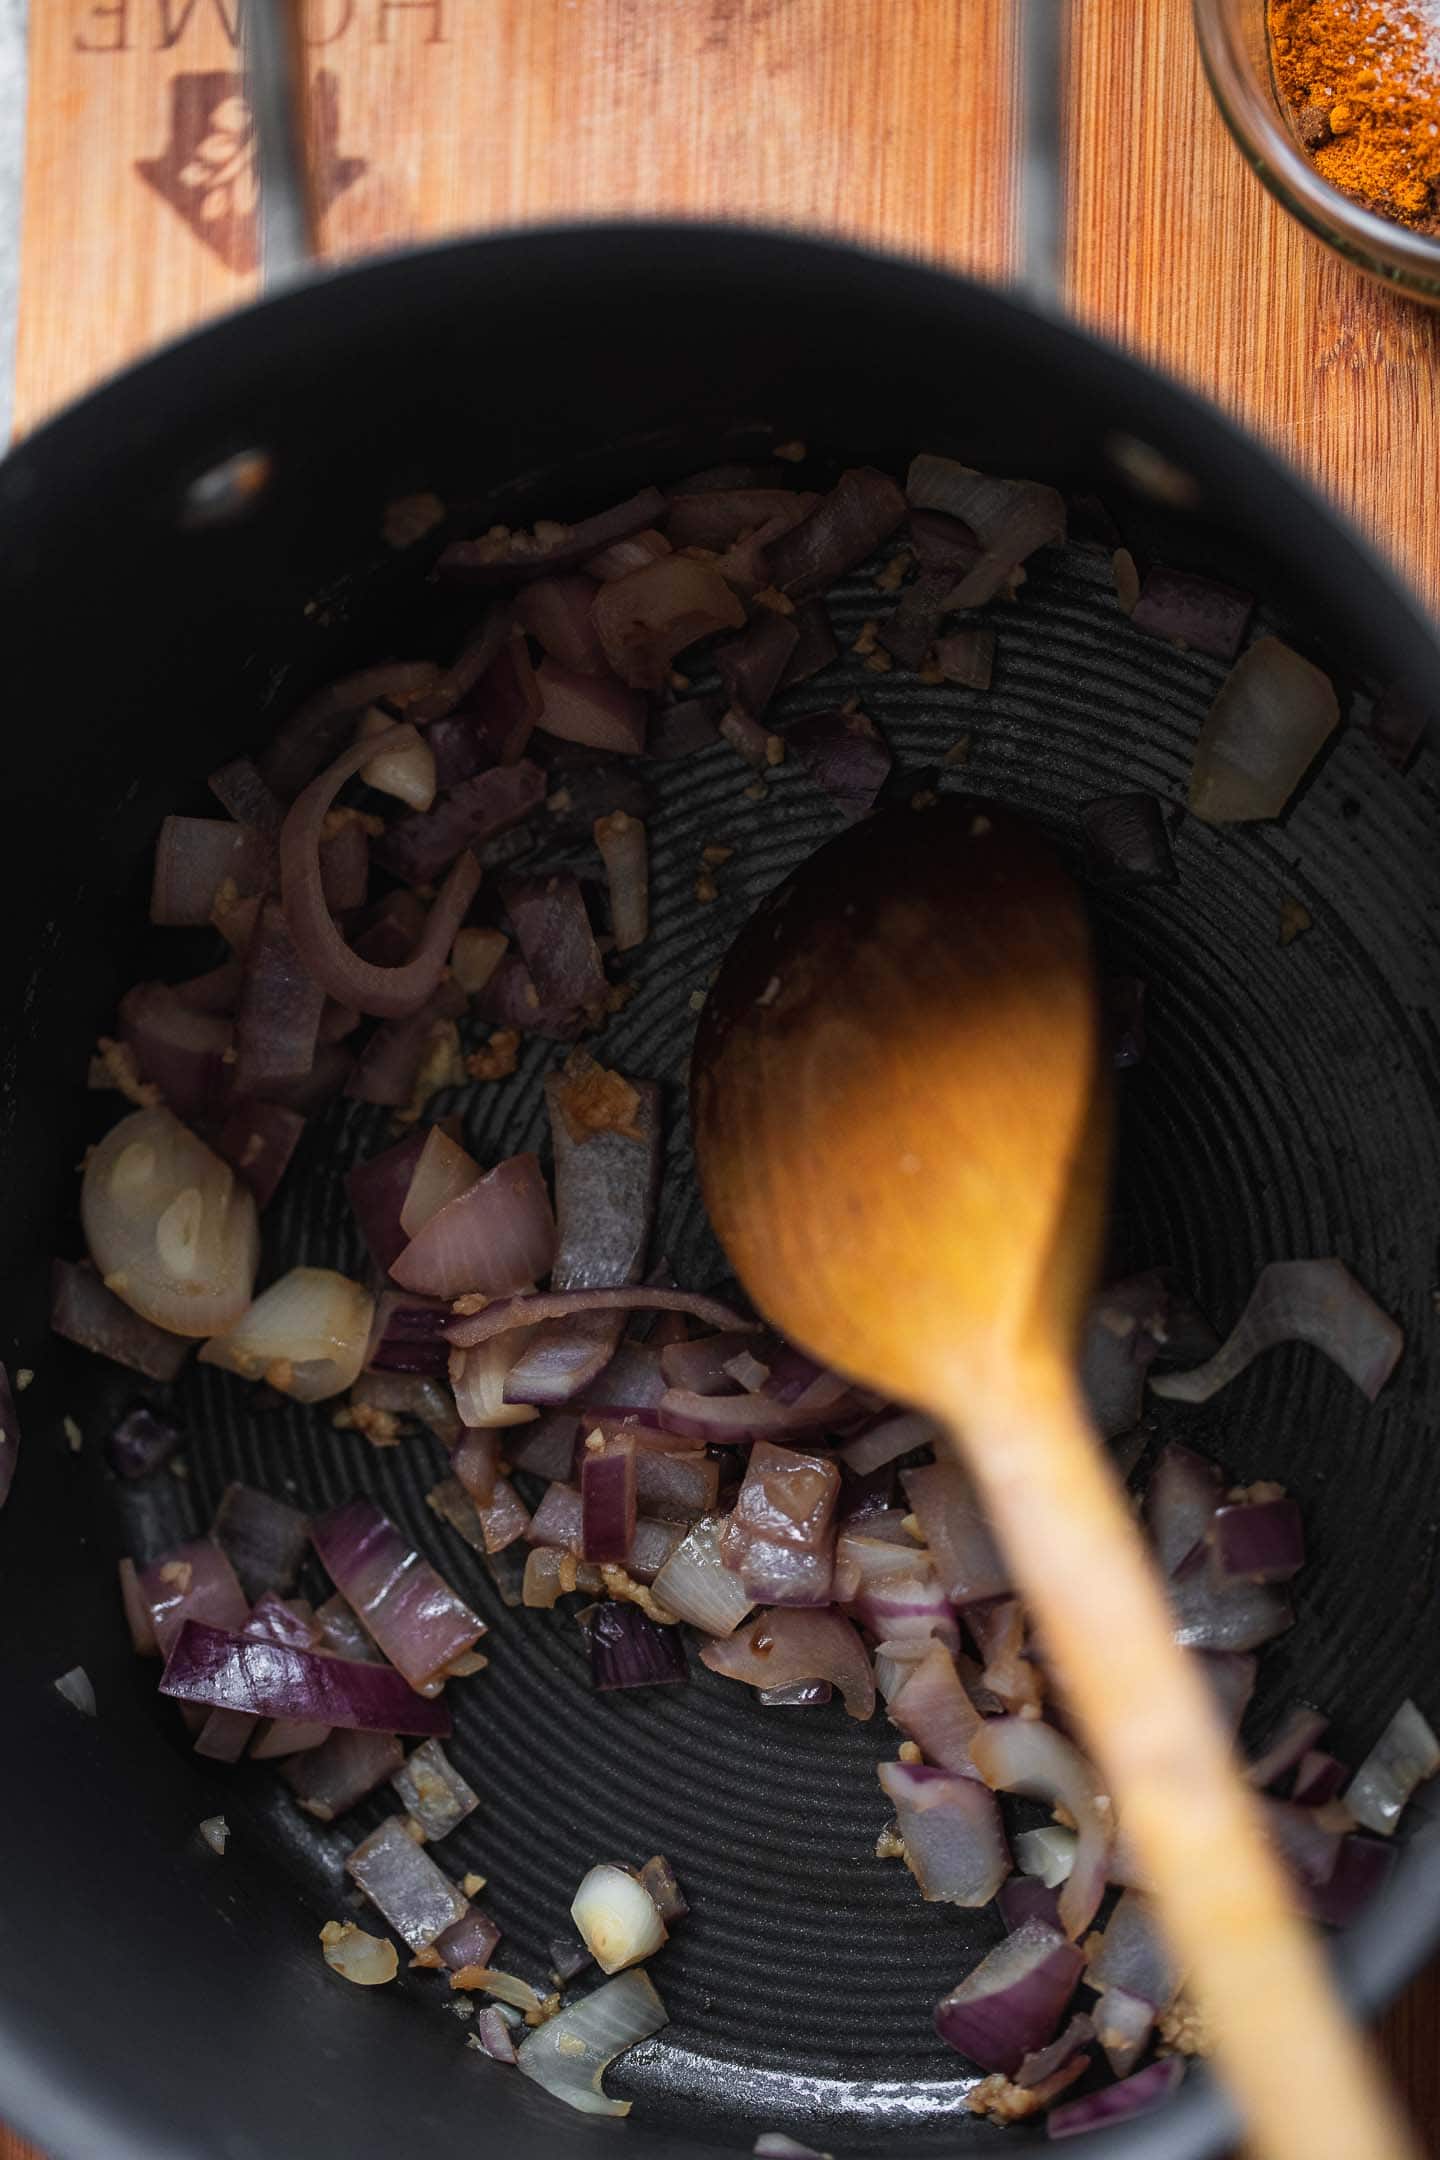 Onions and garlic in a pan